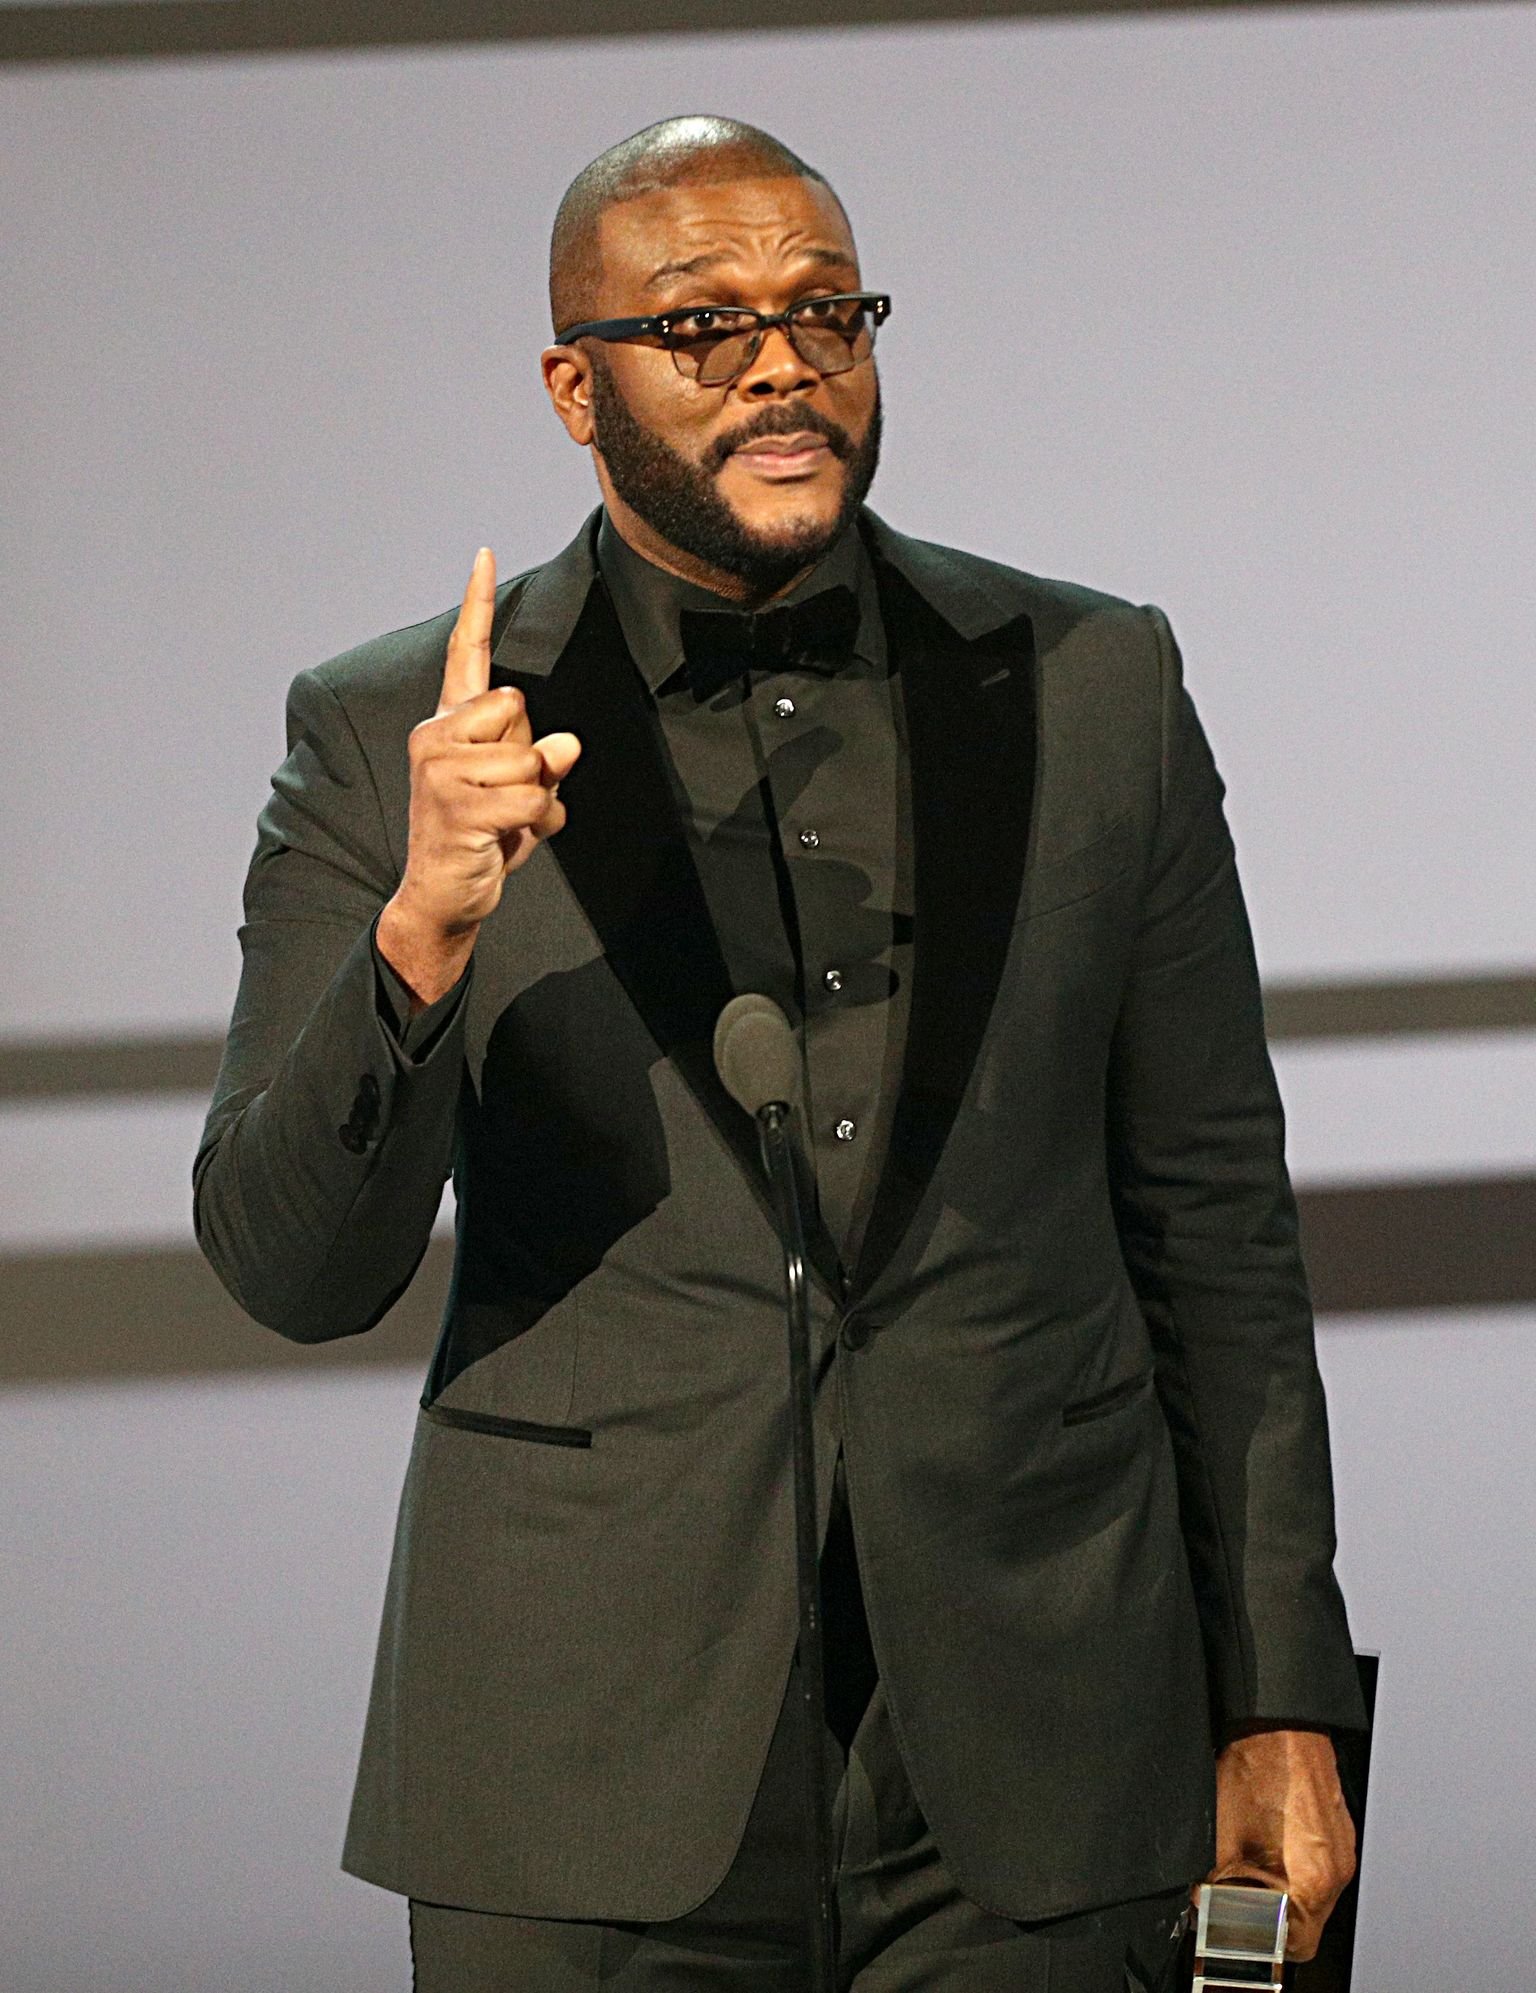 Tyler Perry accepts the Ultimate Icon Award onstage at the BET Awards on June 23, 2019 in Los Angeles, California | Photo: Getty Images